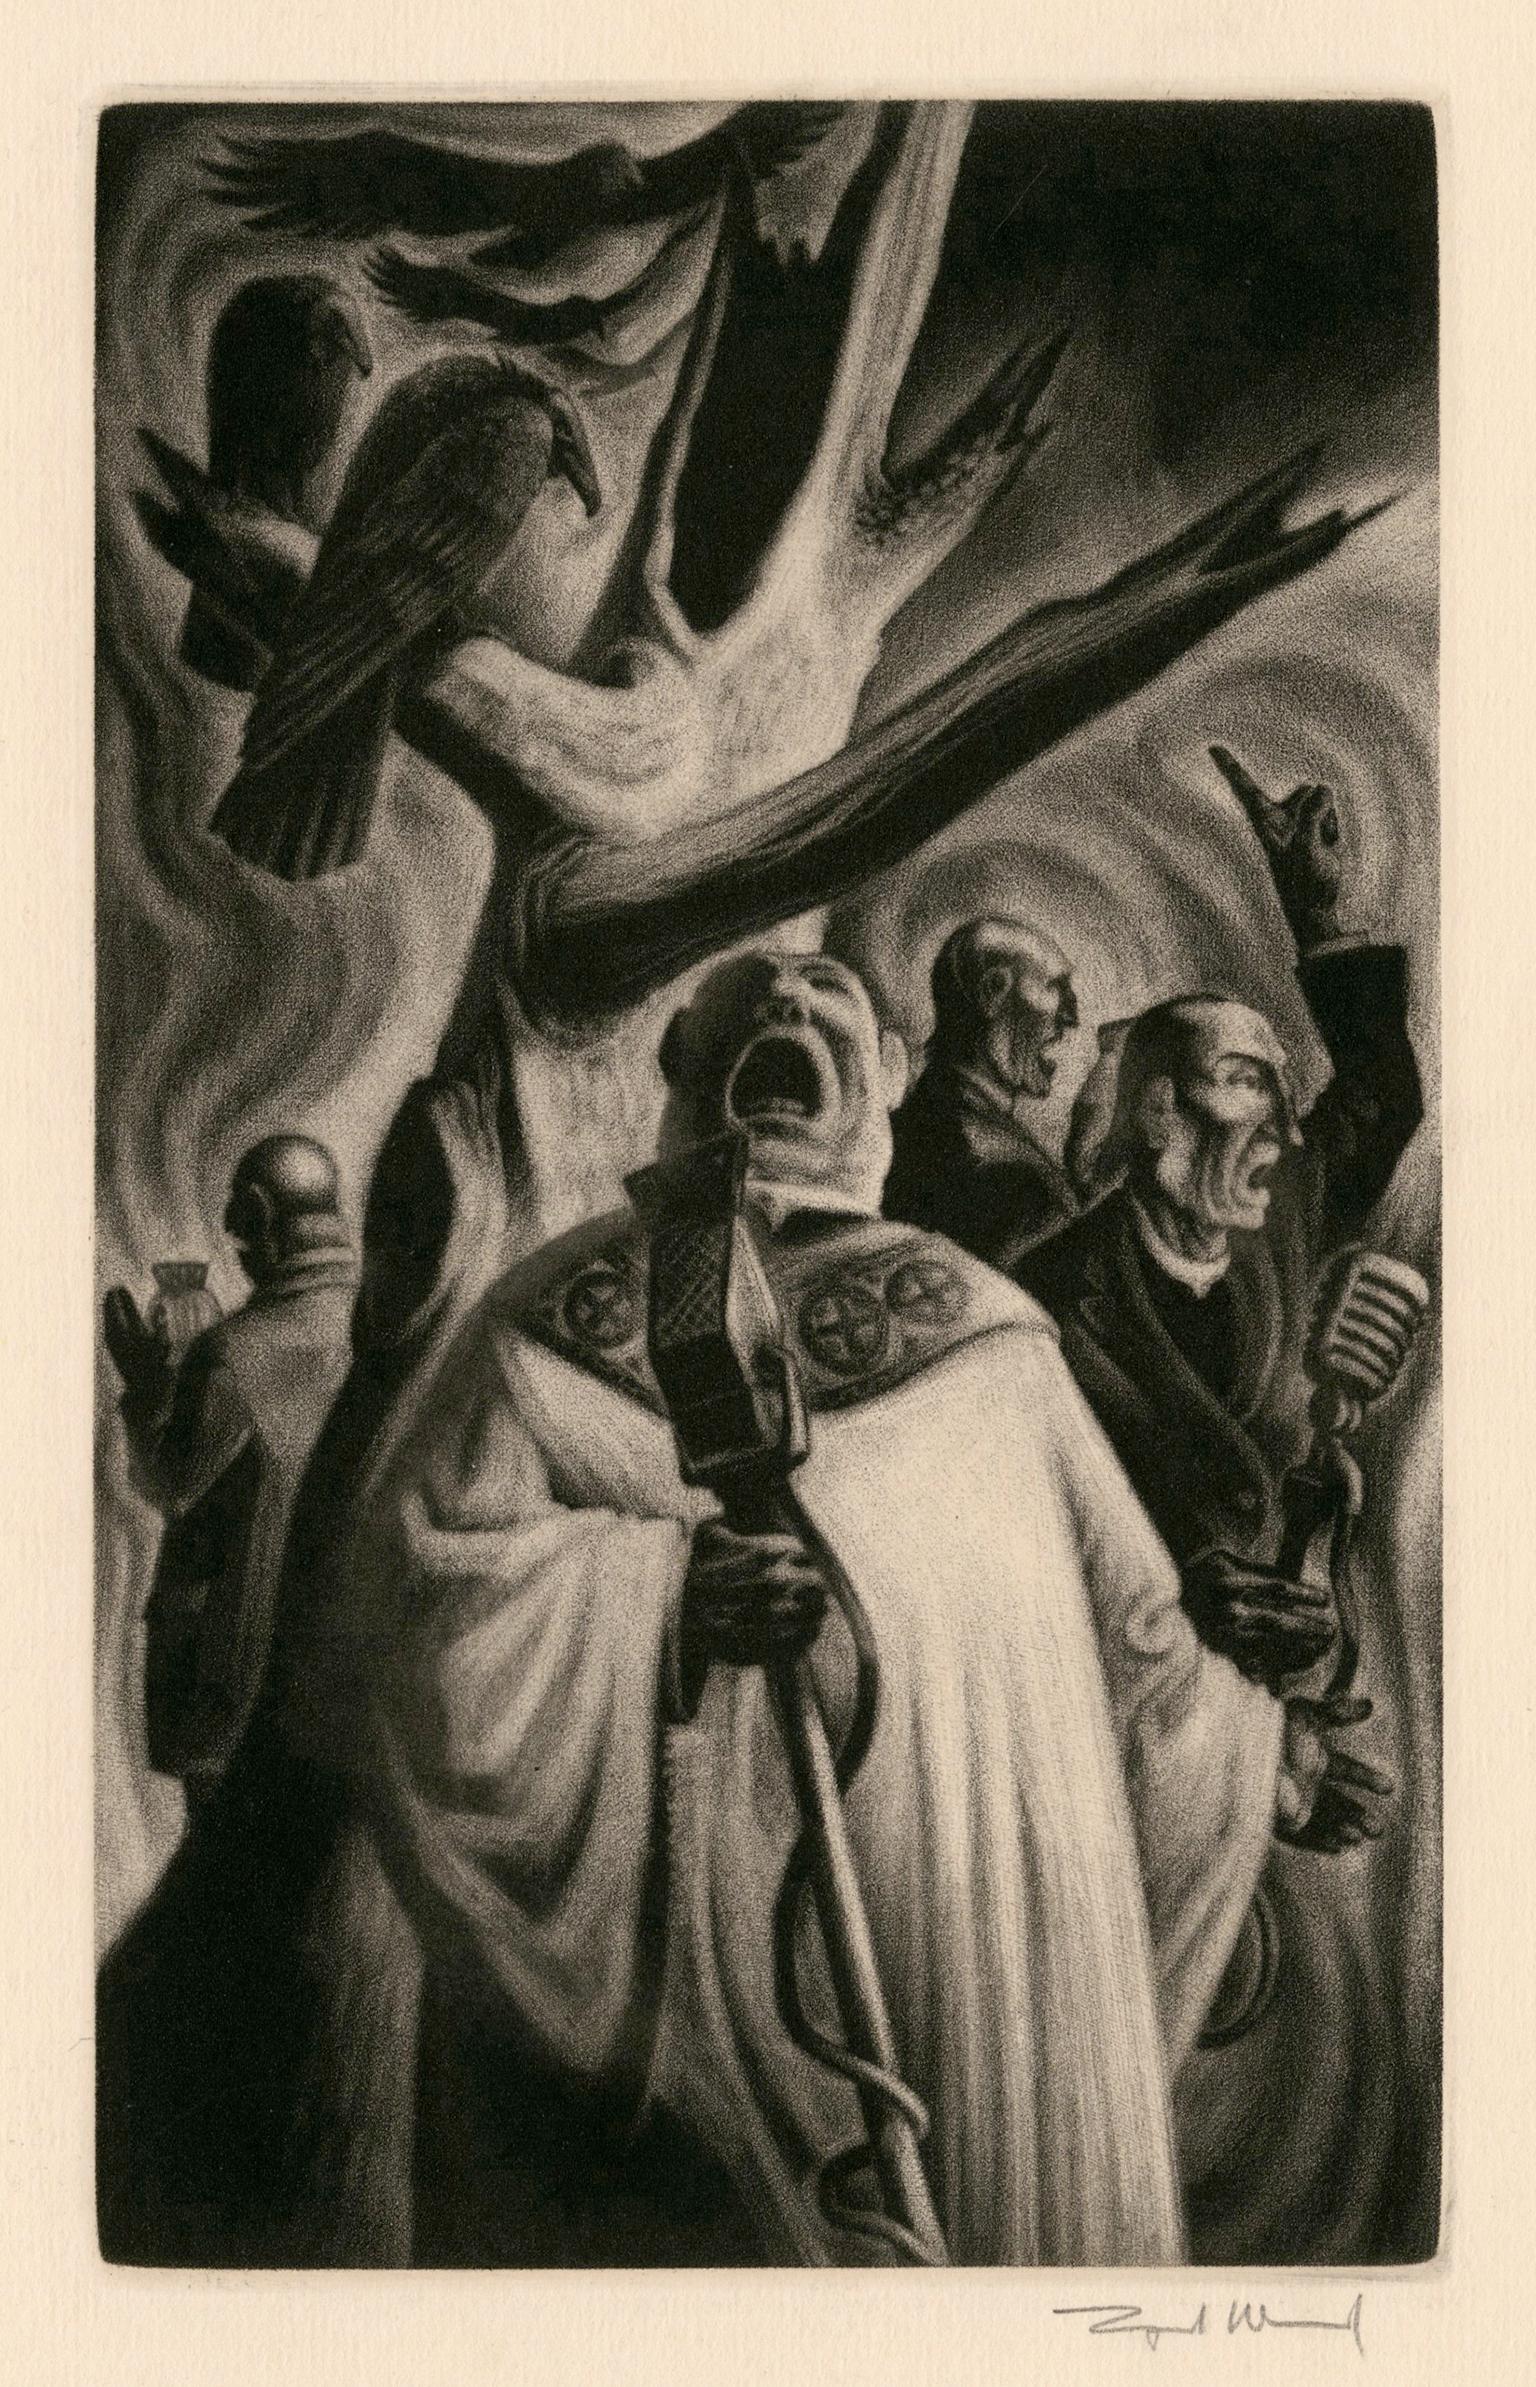 Lynd Ward Figurative Print - 'Priests' from 'In Praise of Folly' — 1940s Graphic Modernism